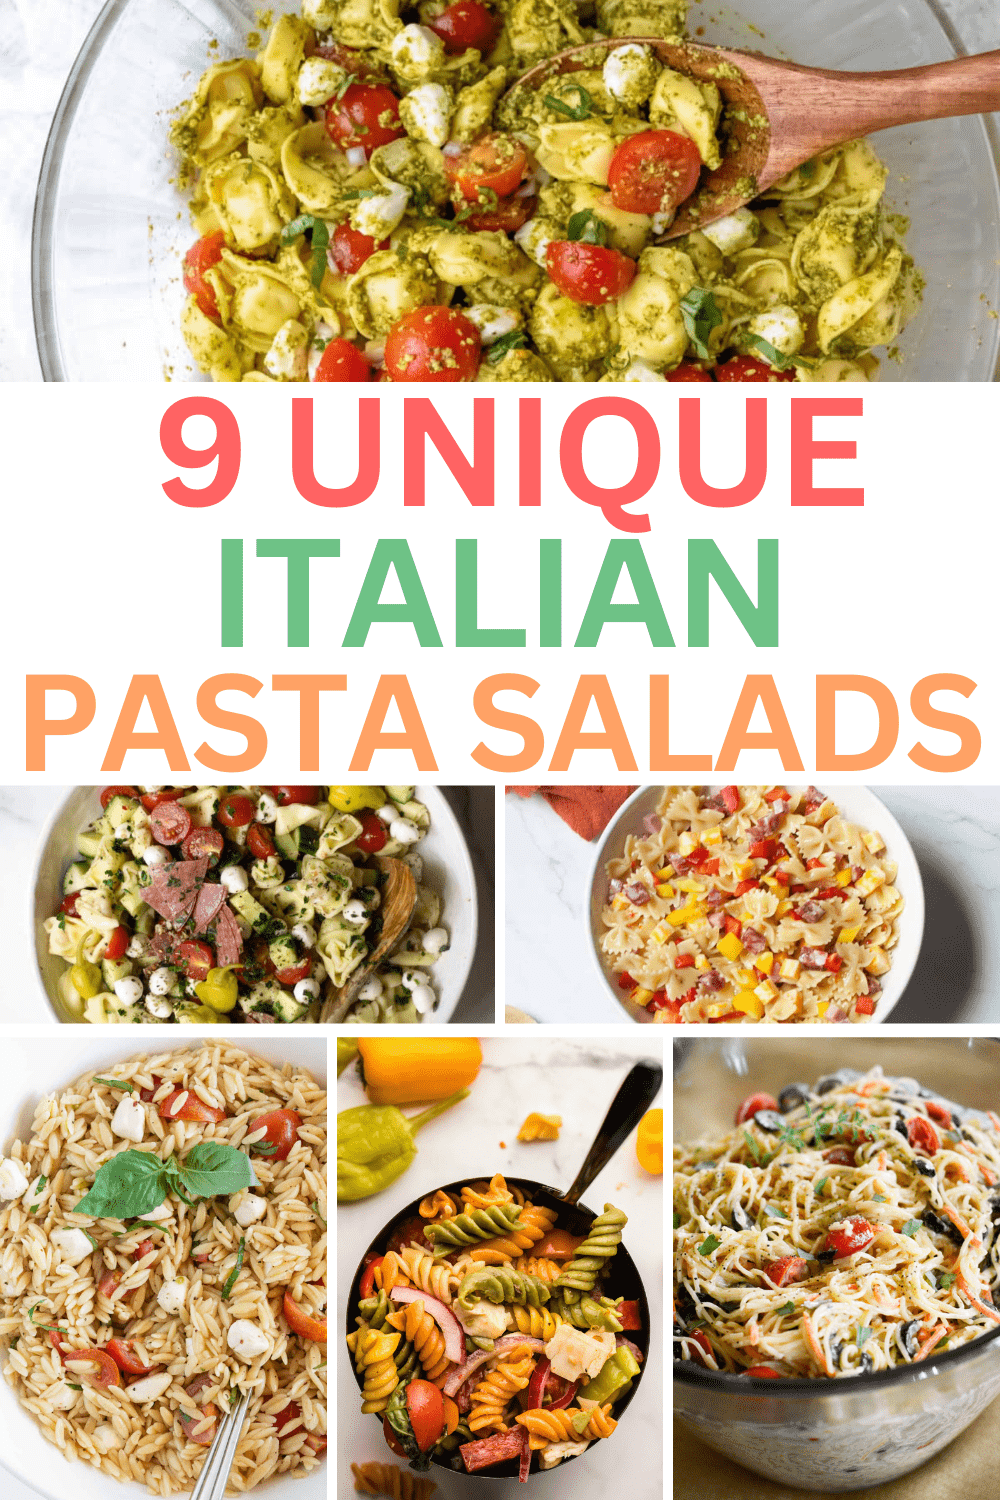 Delicious and easy italian pasta salad recipes that taste better than the deli! These unique twists on traditional cold summer pasta salads with italian dressing are perfect make ahead side dishes for a crowd for your summer party. Zesty italian pasta salad recipes, easy zesty italian pasta salad, pasta salad zesty italian dressing, best italian pasta salad recipe, summer italian pasta salad recipes cold easy, easy cold pasta salad recipes healthy italian dressing, simple pasta salad recipes.